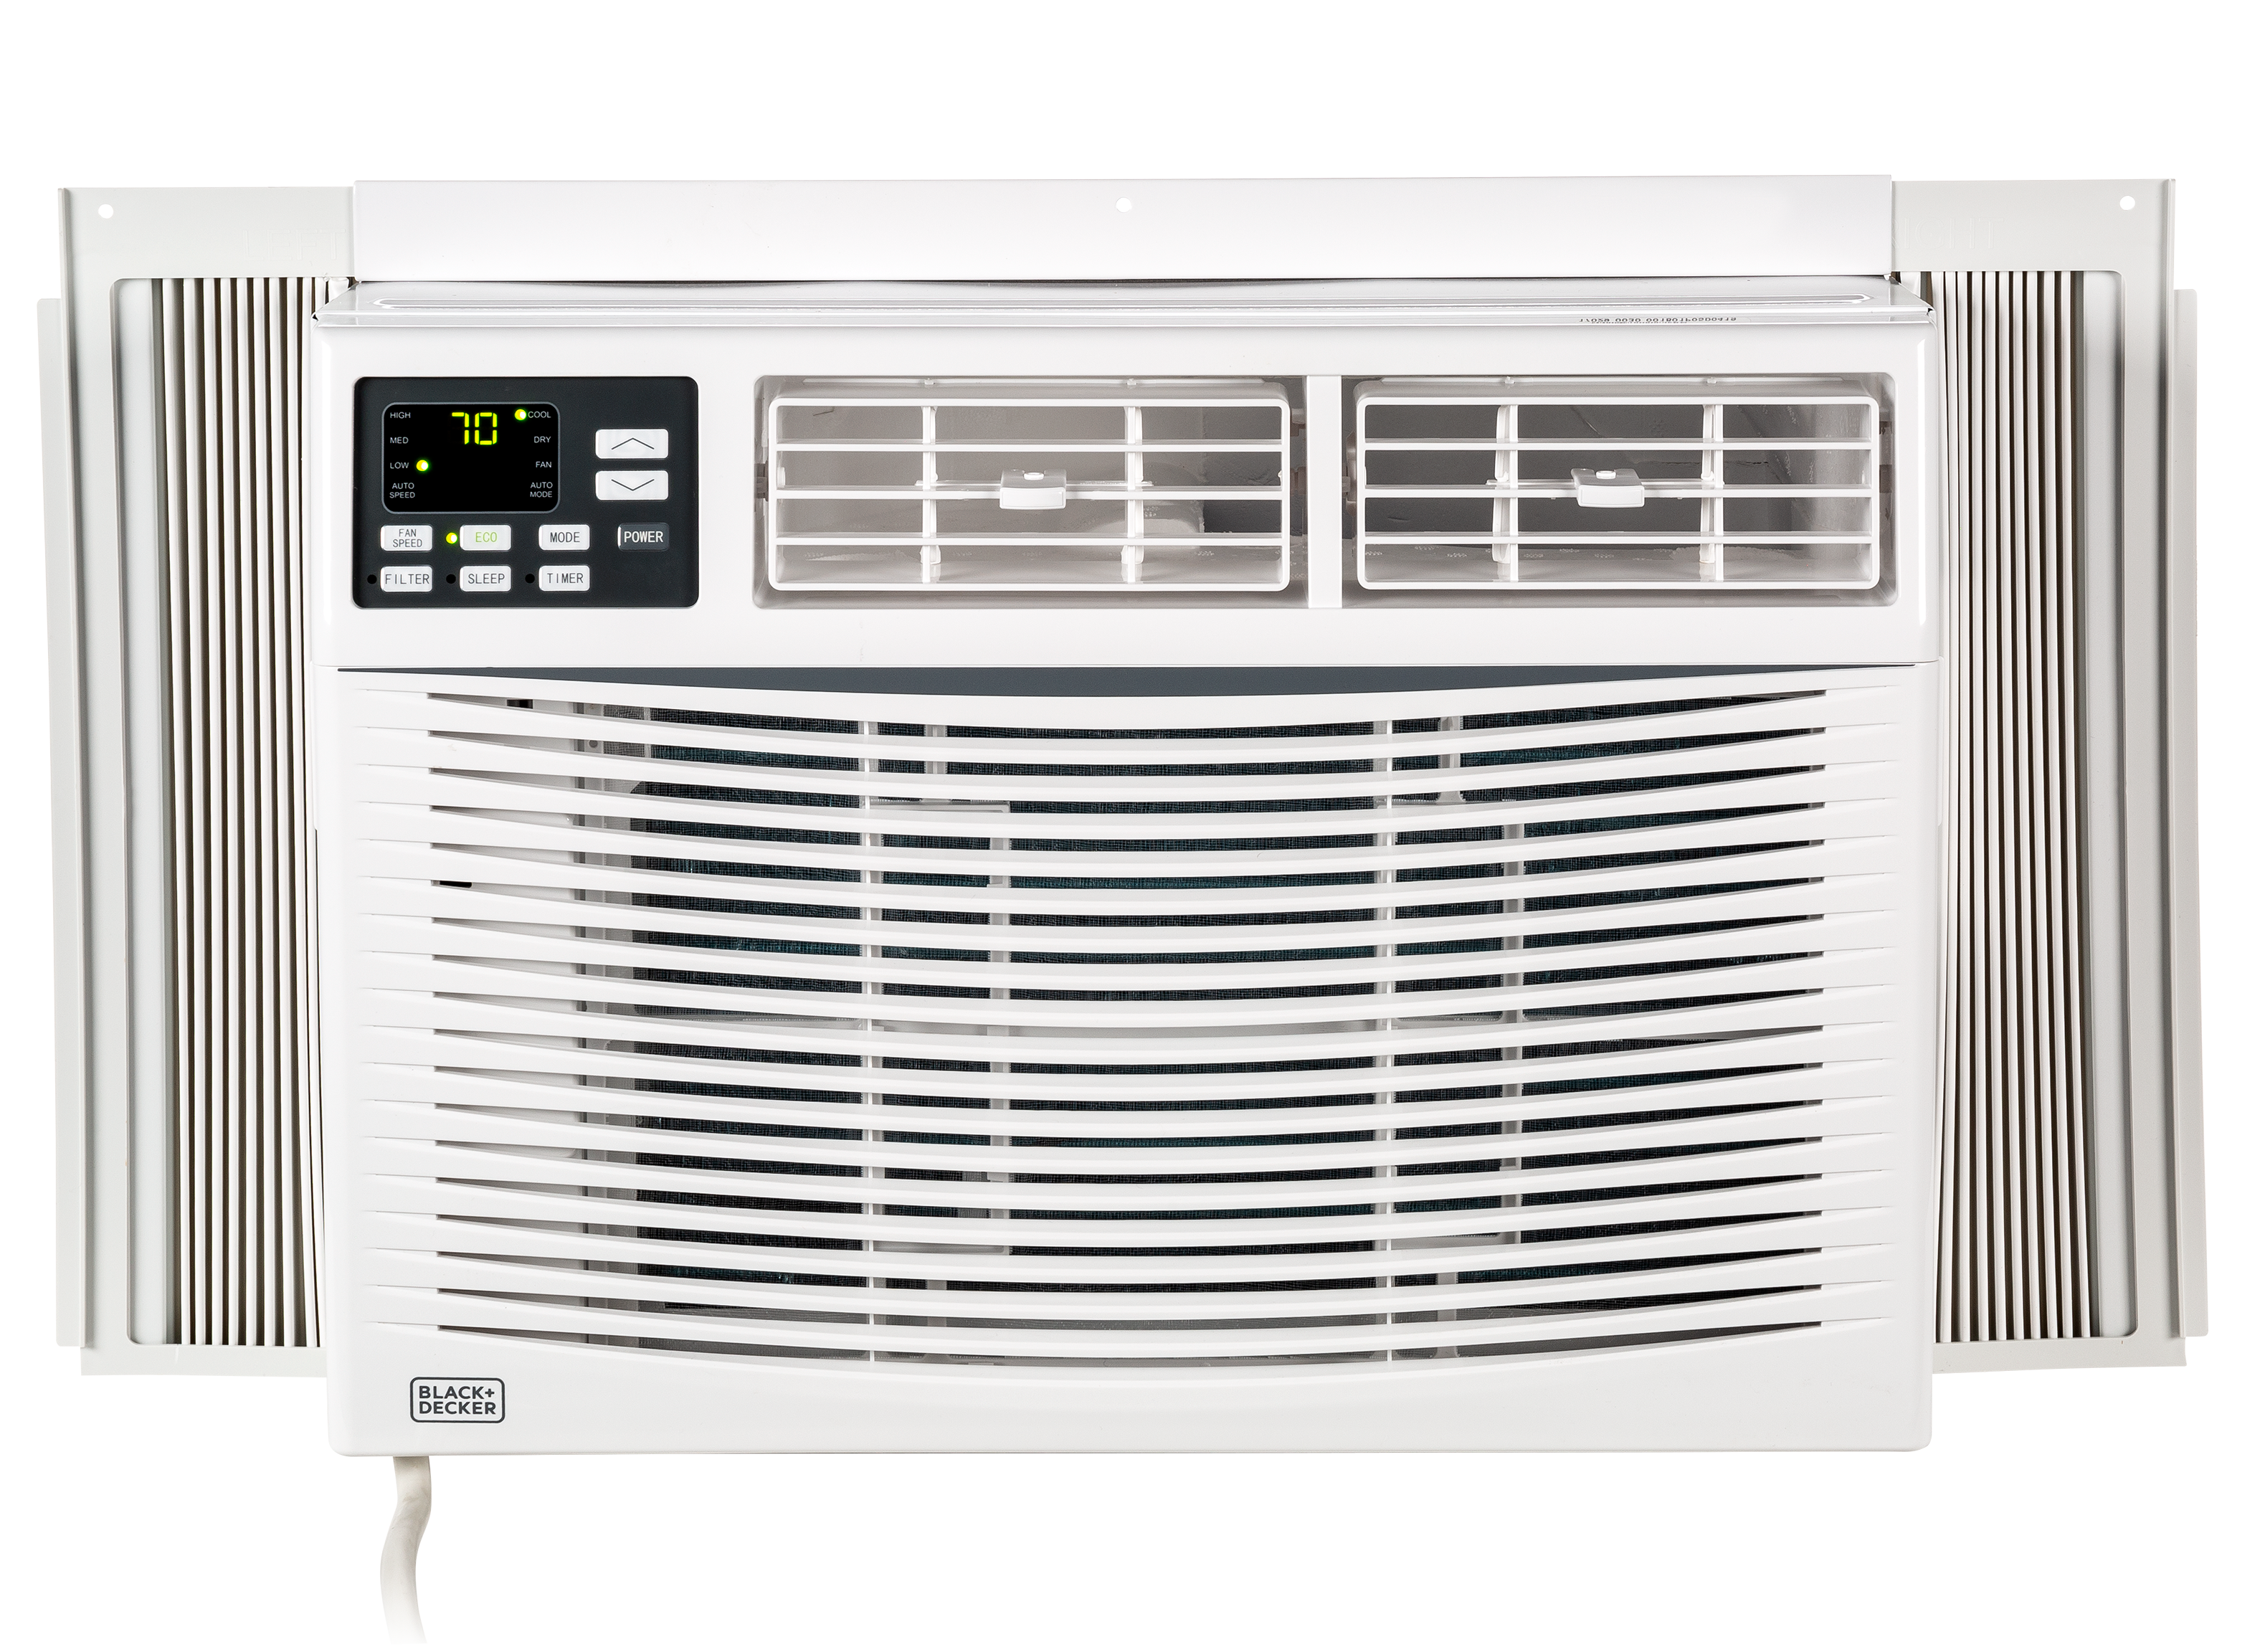 https://crdms.images.consumerreports.org/prod/products/cr/models/398419-window-air-conditioners-black-decker-bwac10wt-10005946.png